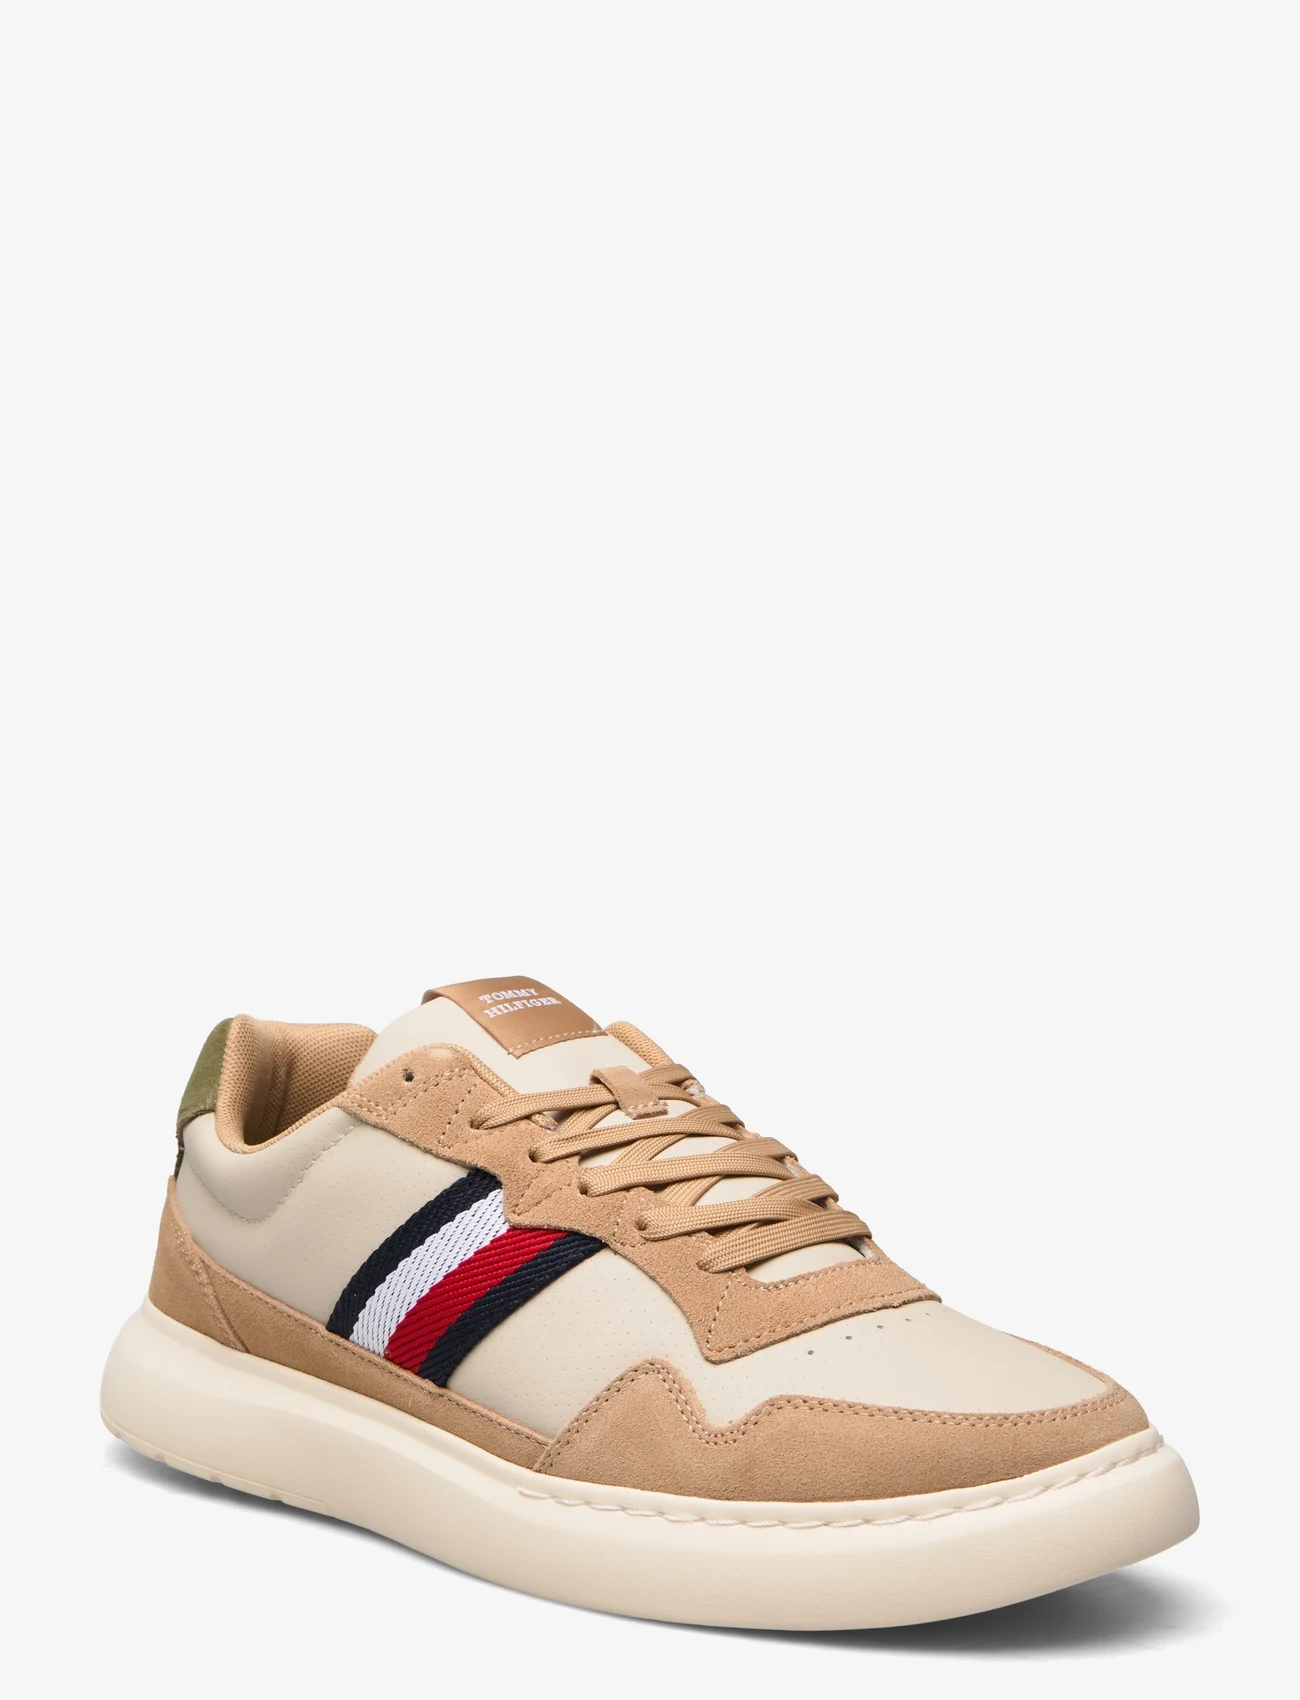 Tommy Hilfiger - LIGHTWEIGHT CUP LTH MIX - low tops - classic khaki - 0